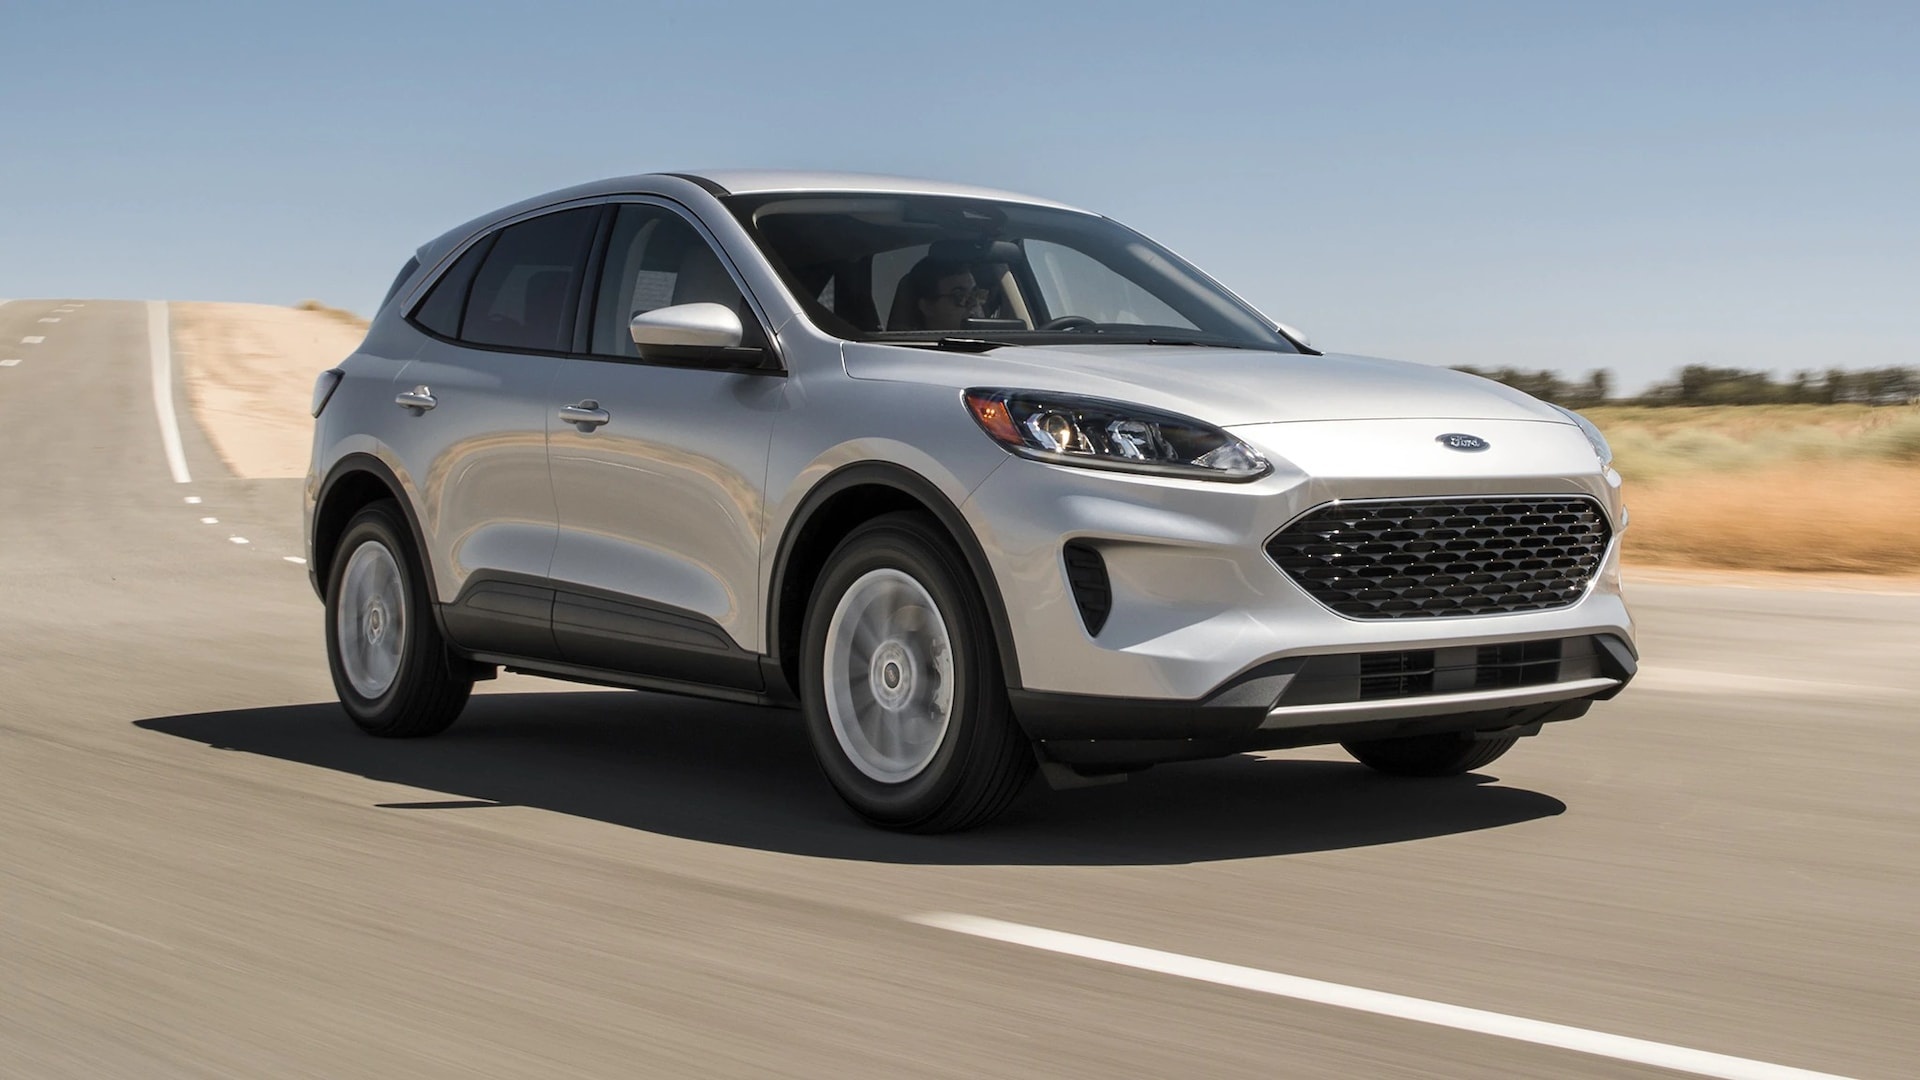 Ford Escape, 2022 buyer's guide, Reviews and specs, Comparisons, 1920x1080 Full HD Desktop